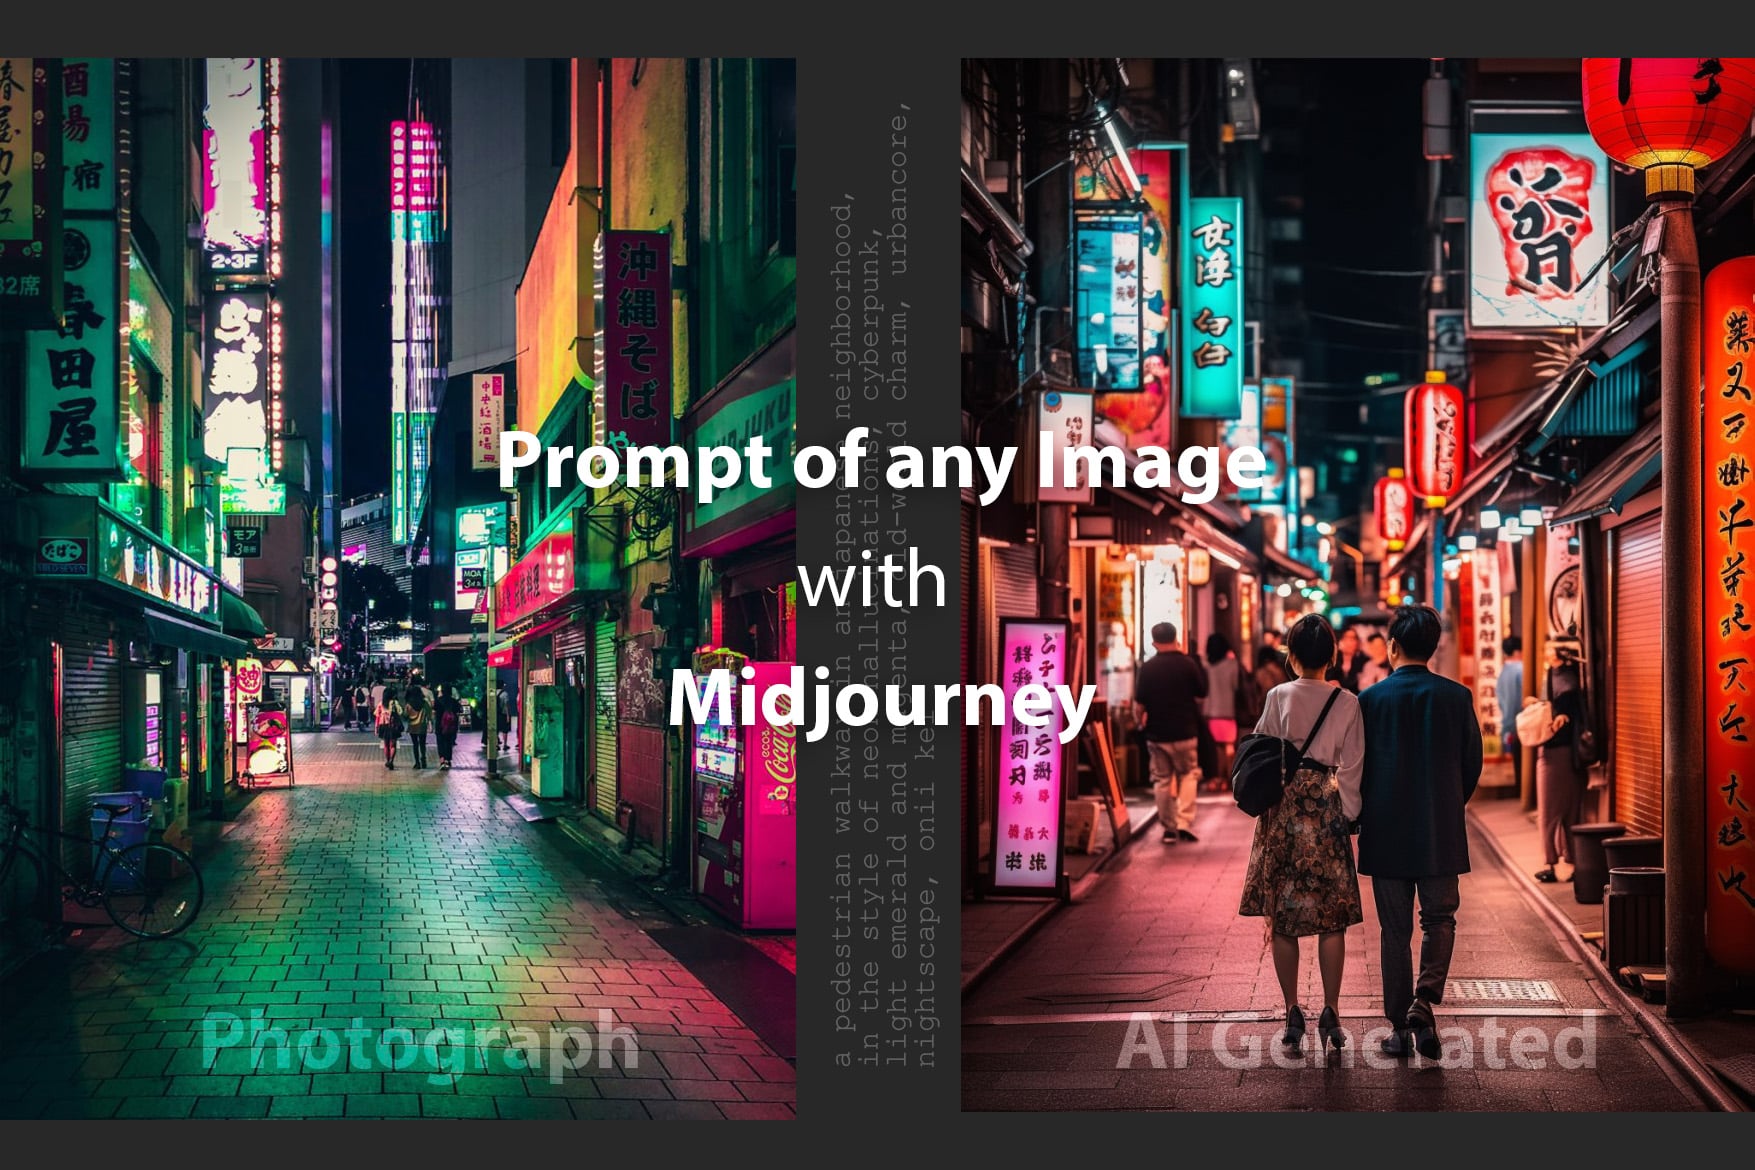 Get the Prompt of any Image with Midjourney